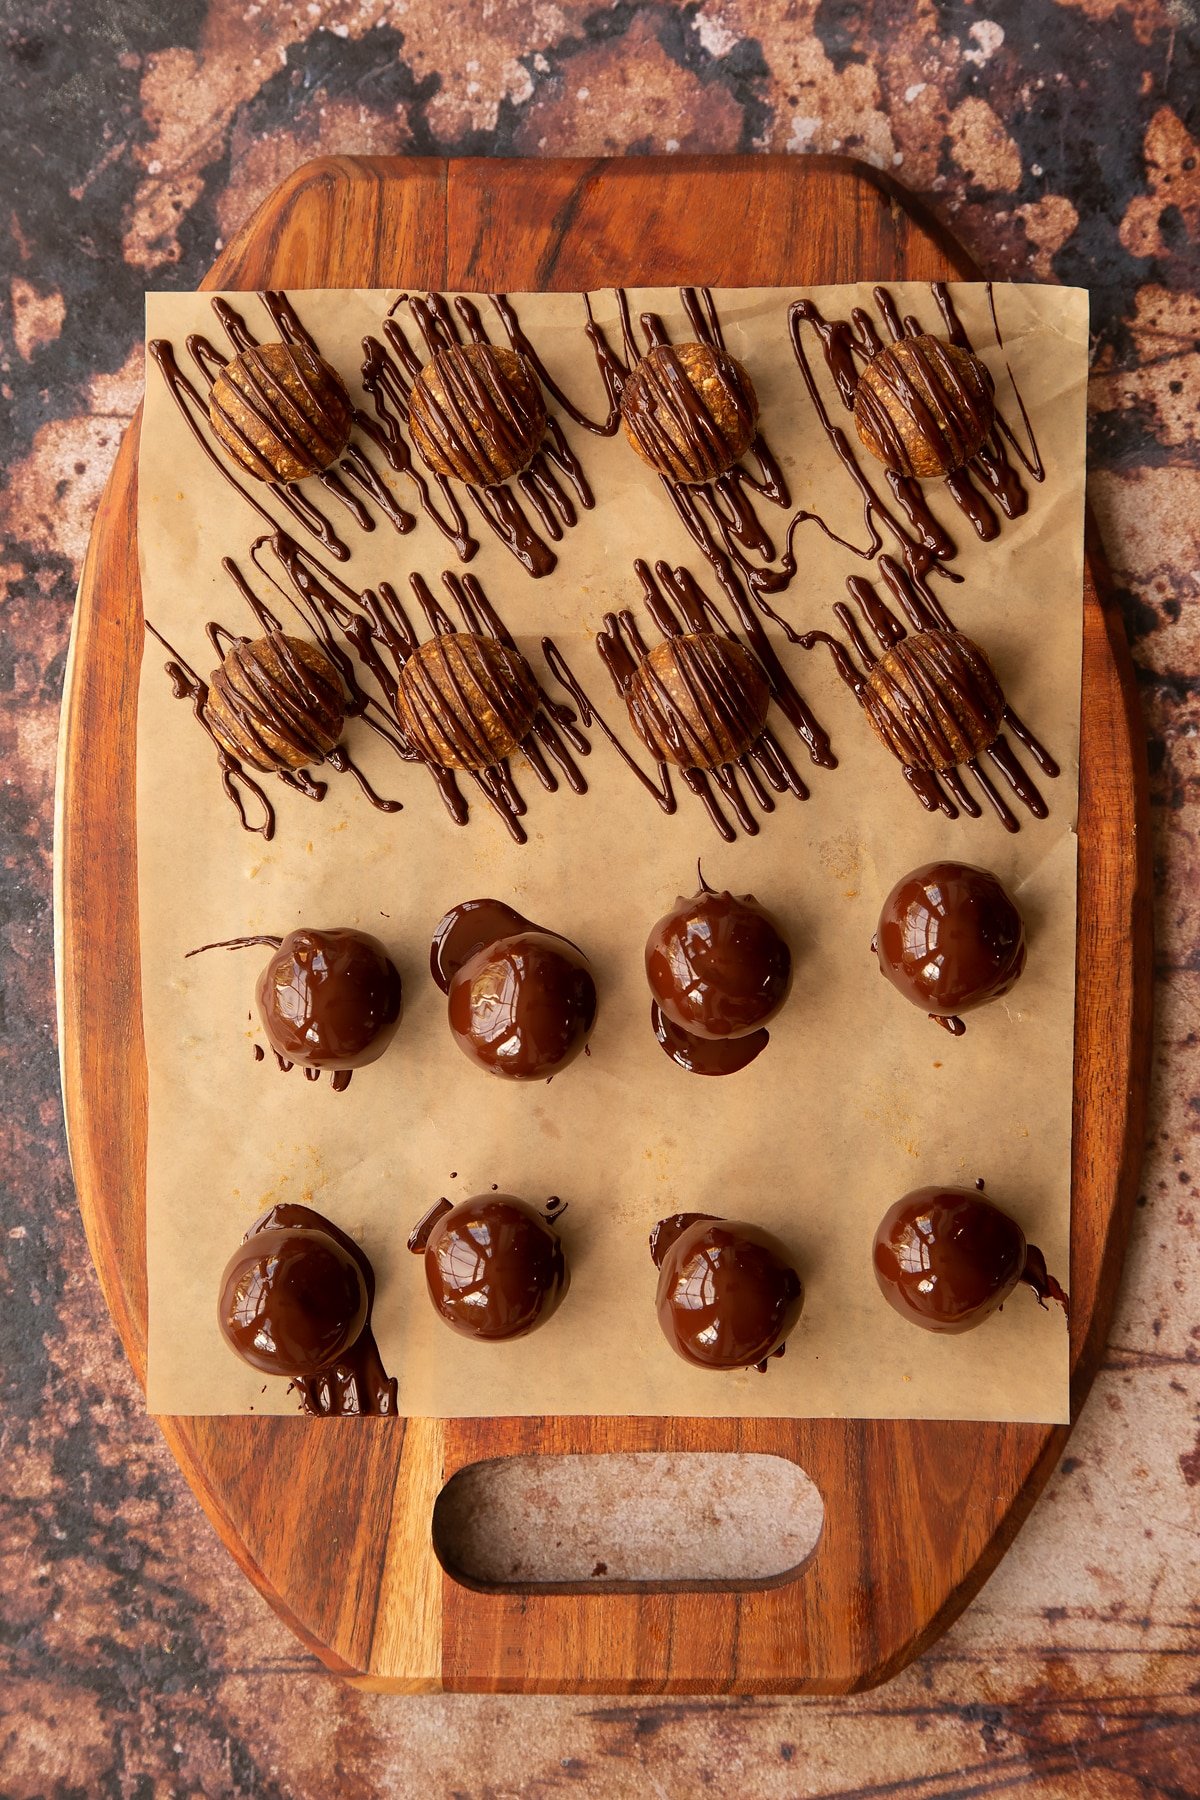 16 small round date energy balls on a parchment lined wooden chopping board 8 drizzled in chocolate and 8 covered in chocolate.